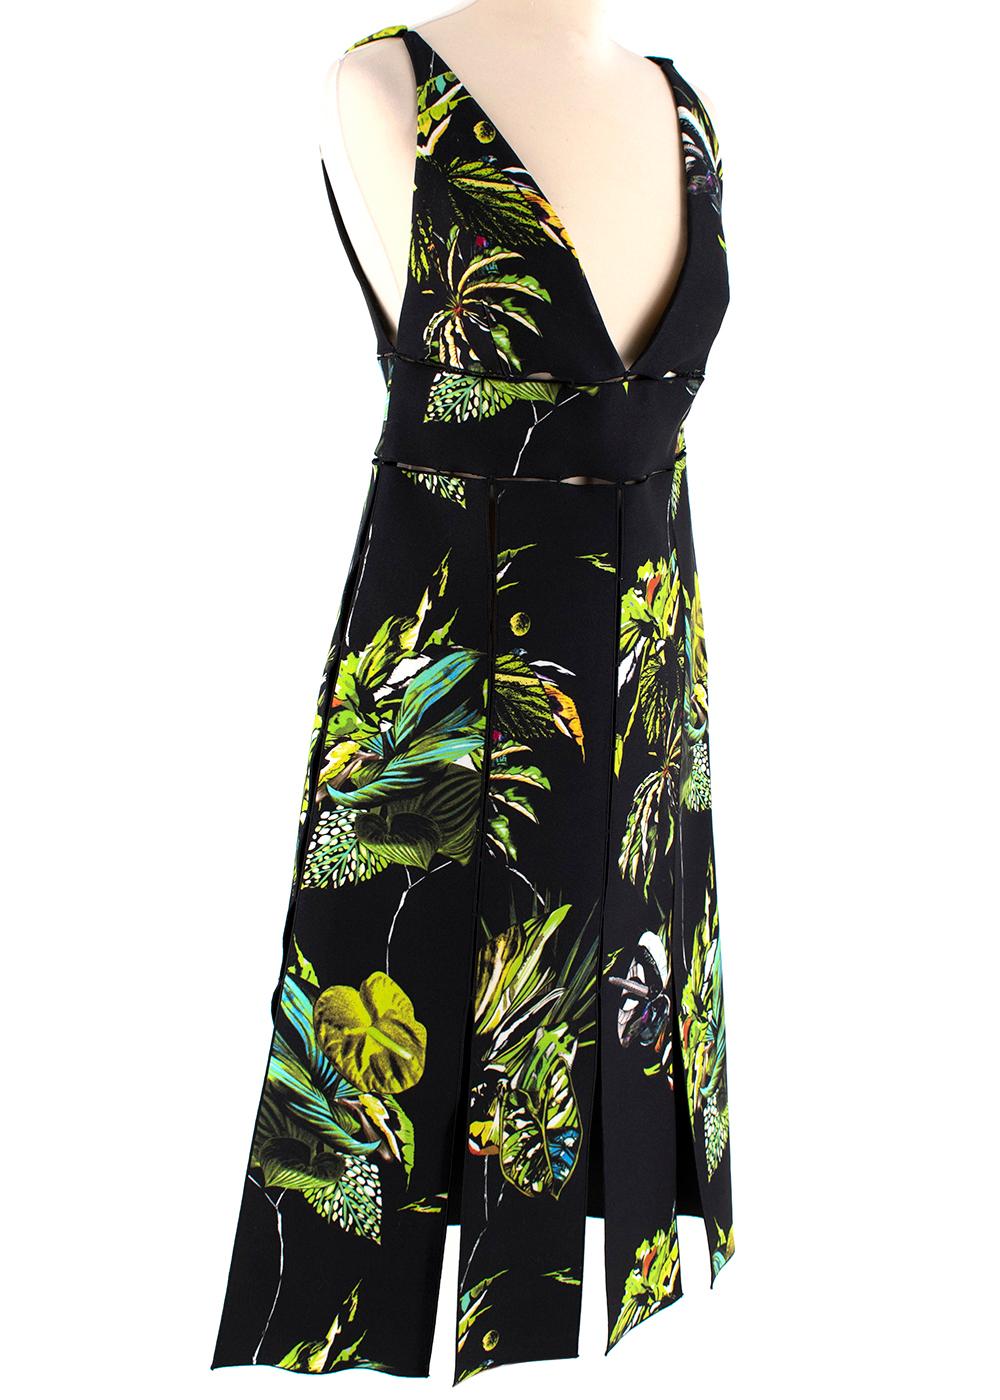 Proenza Schouler Black Tropical Print Cut-Out Dress

- Stunning, vibrant tropical print
- Gorgeous cutout detail throughout
- Concealed zipper enclosure down side
- Mid-weight fabric
- Fit-and-Flare silhouette
- Front and back v-neckline

Materials: